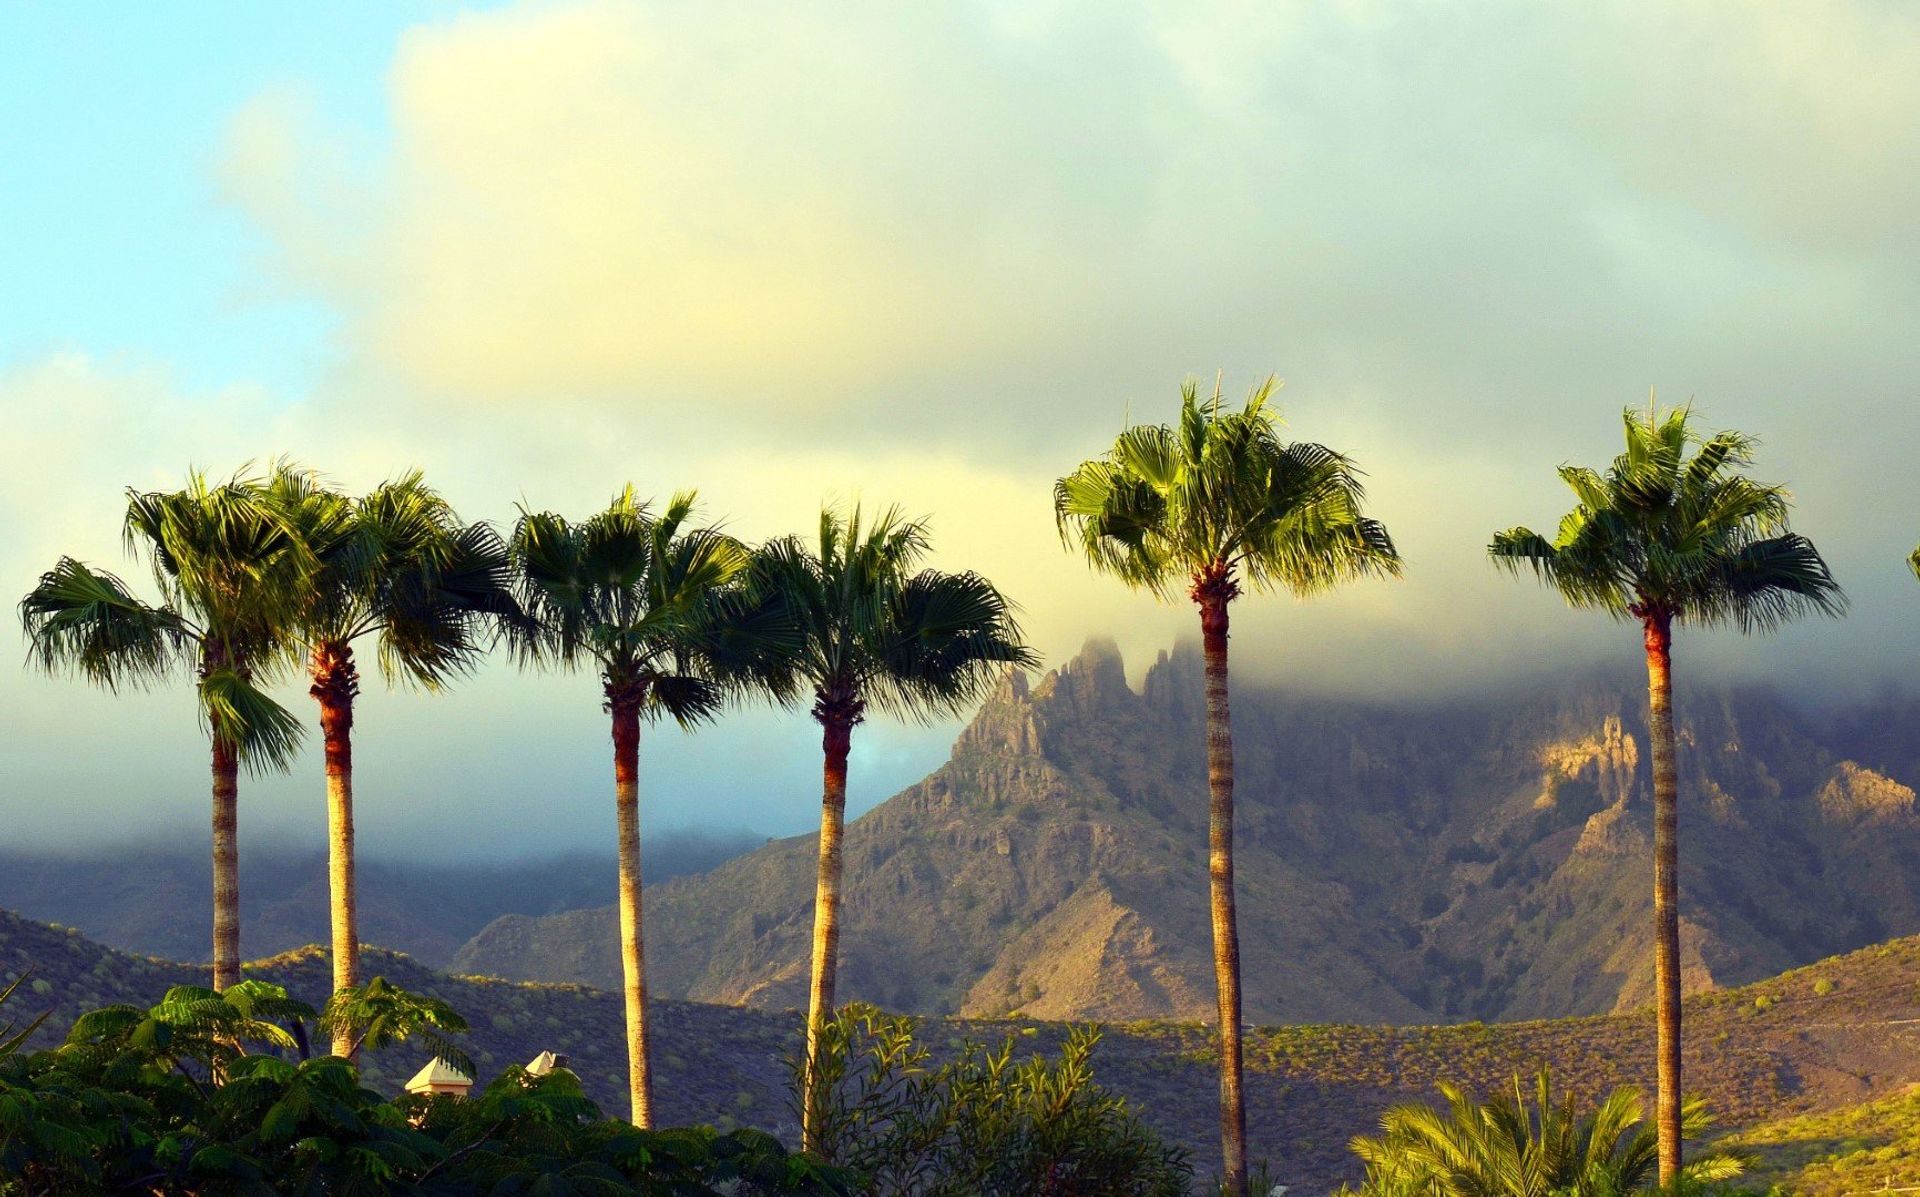 A hiker's paradise! Miles of hiking trails wind around the mountainous Tenerife landscape